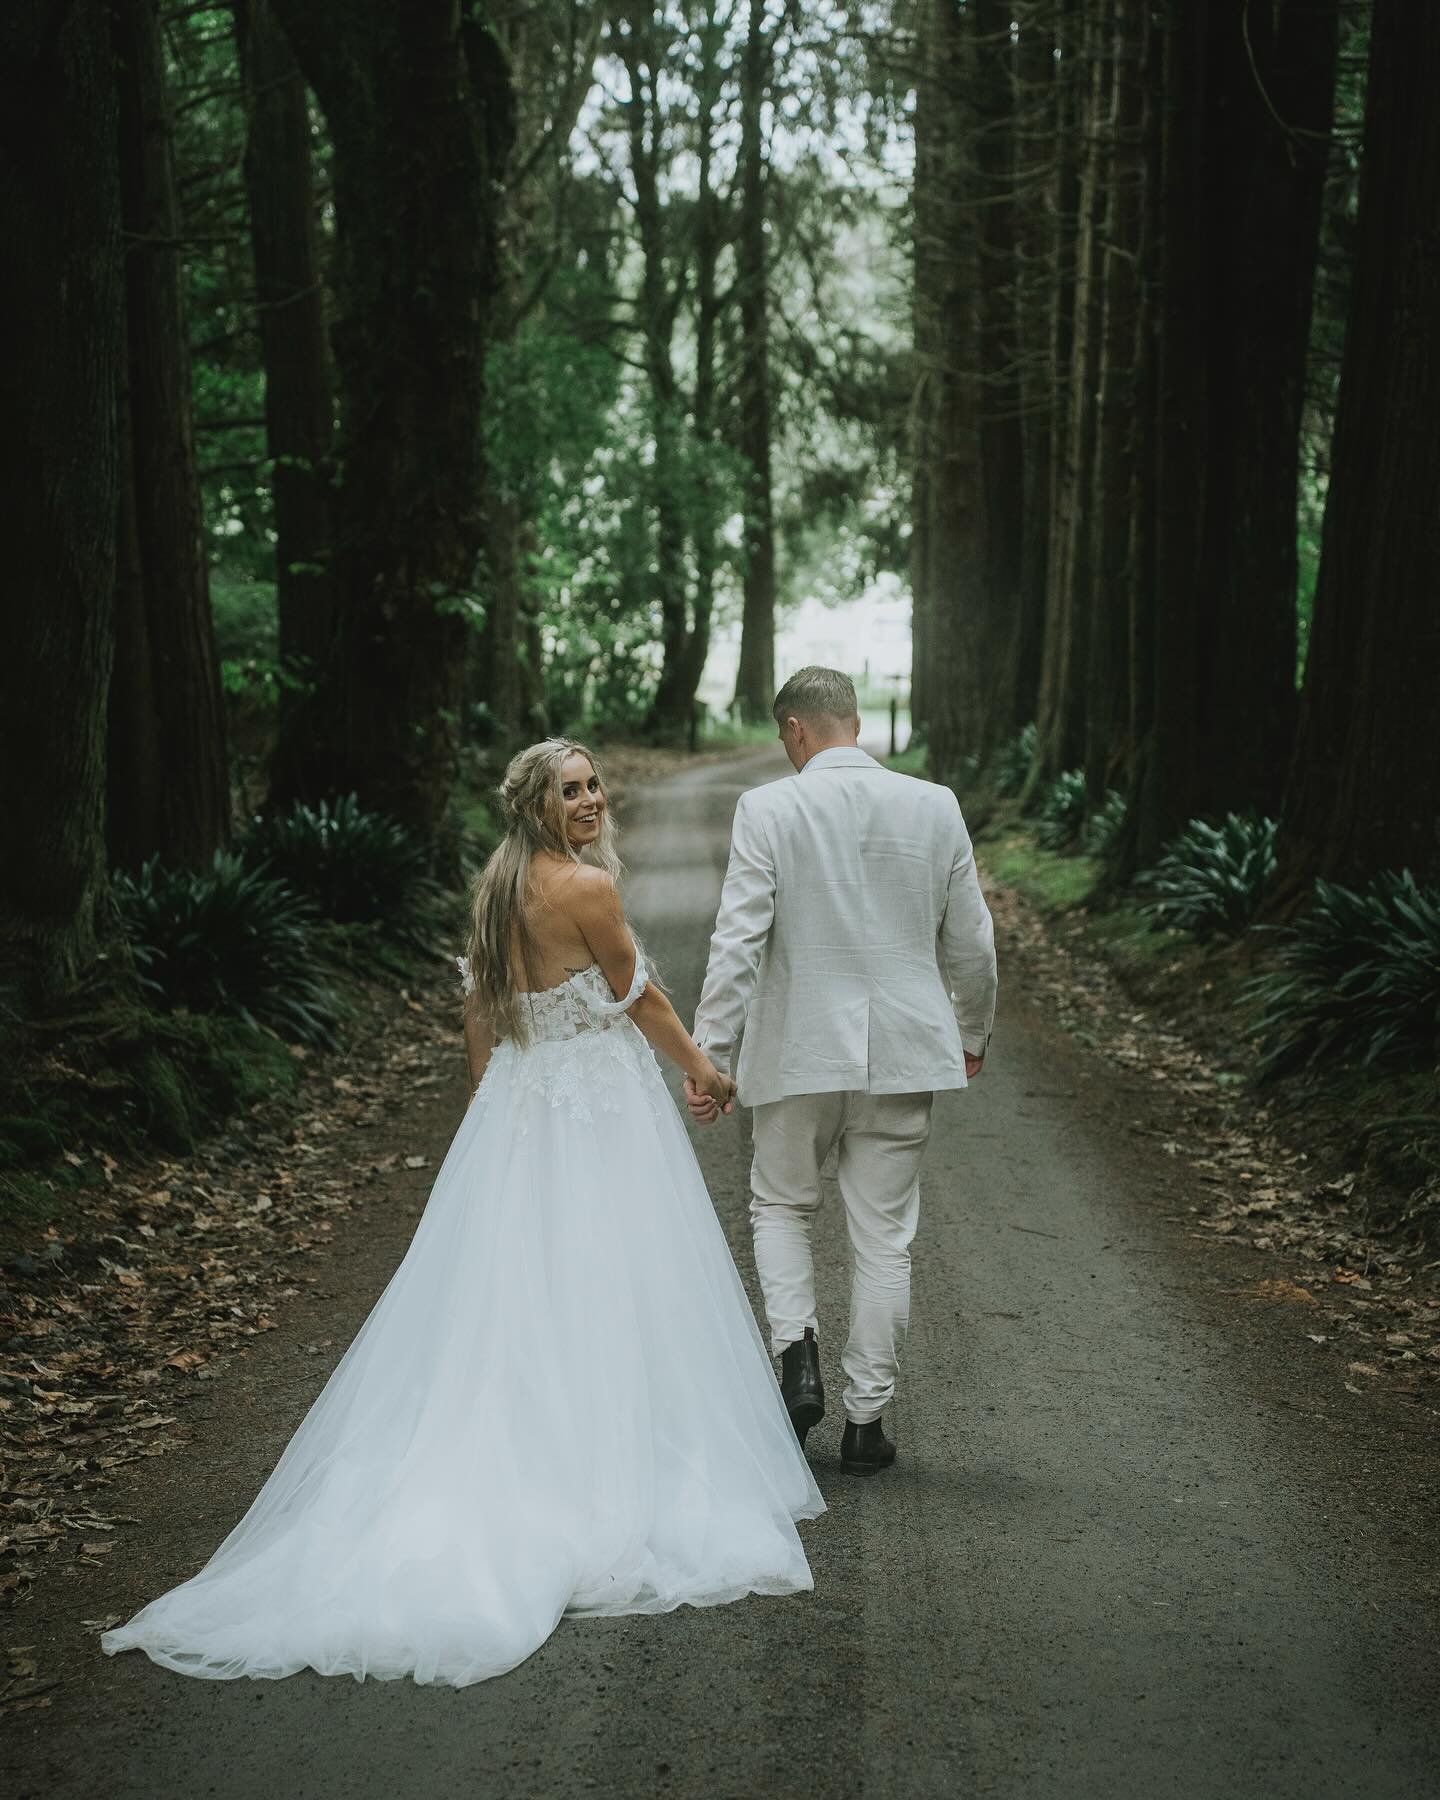 Courtney + Sam, a love-filled day where even the drizzle added to their magic 🤍

@intheframe_weddings